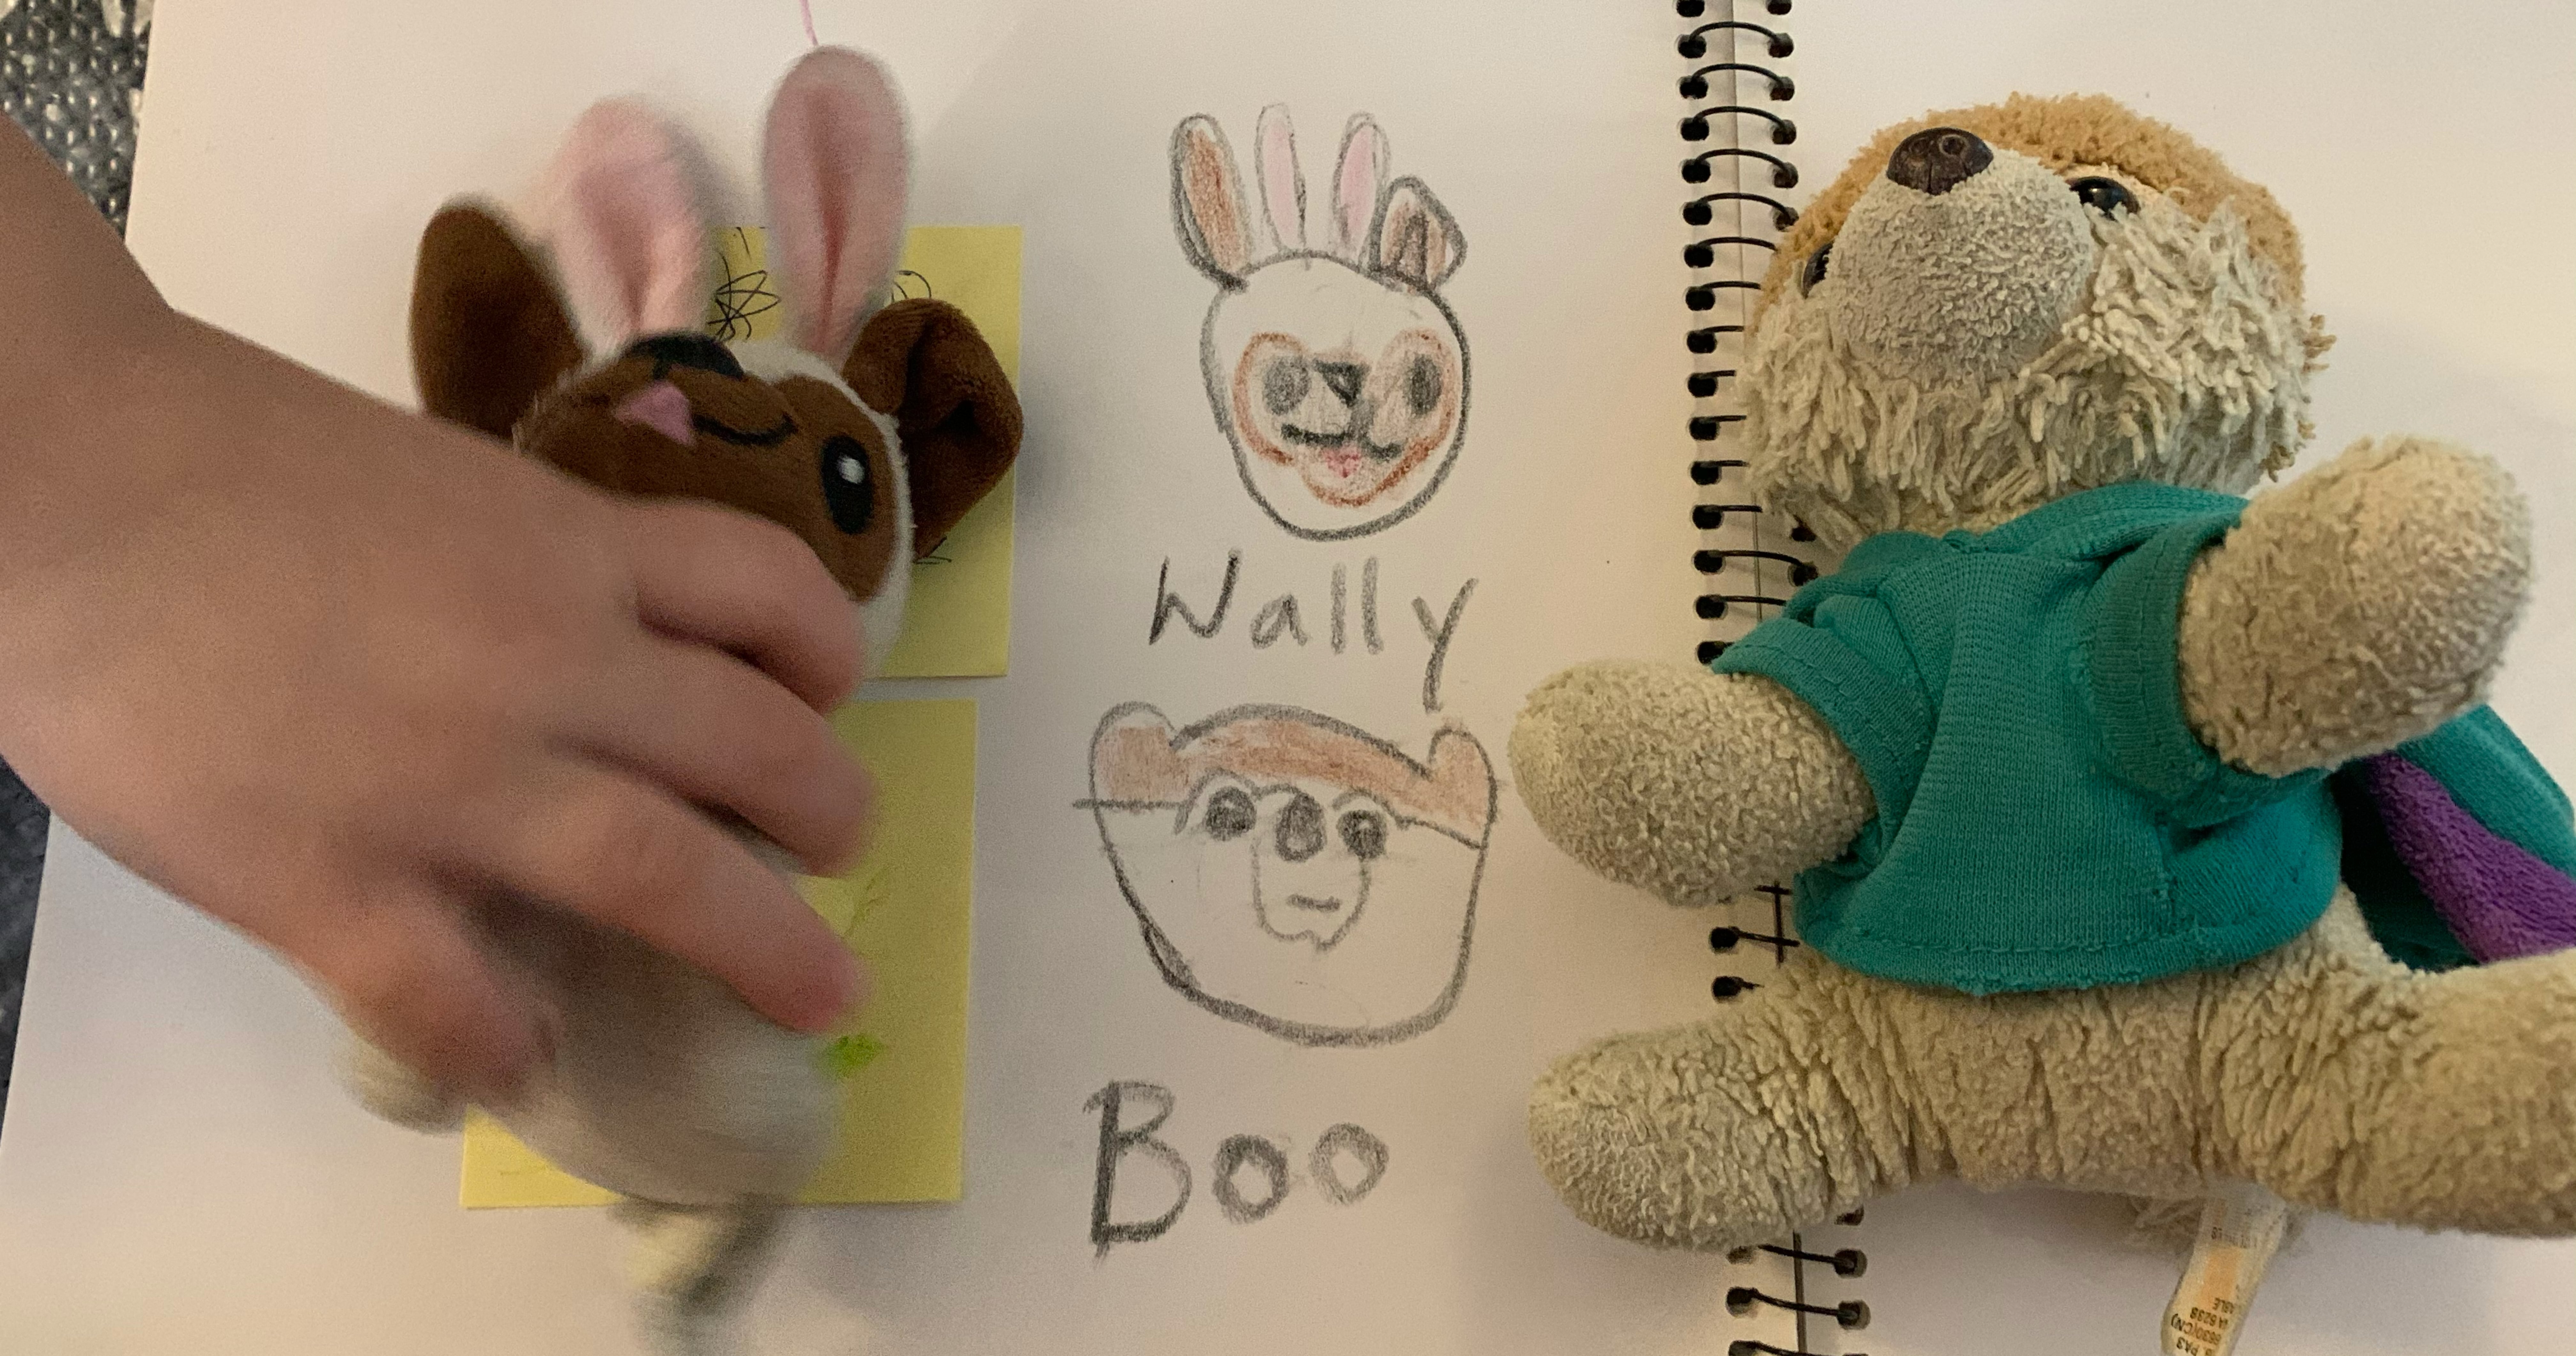 Wally and Boo Crayon on paper